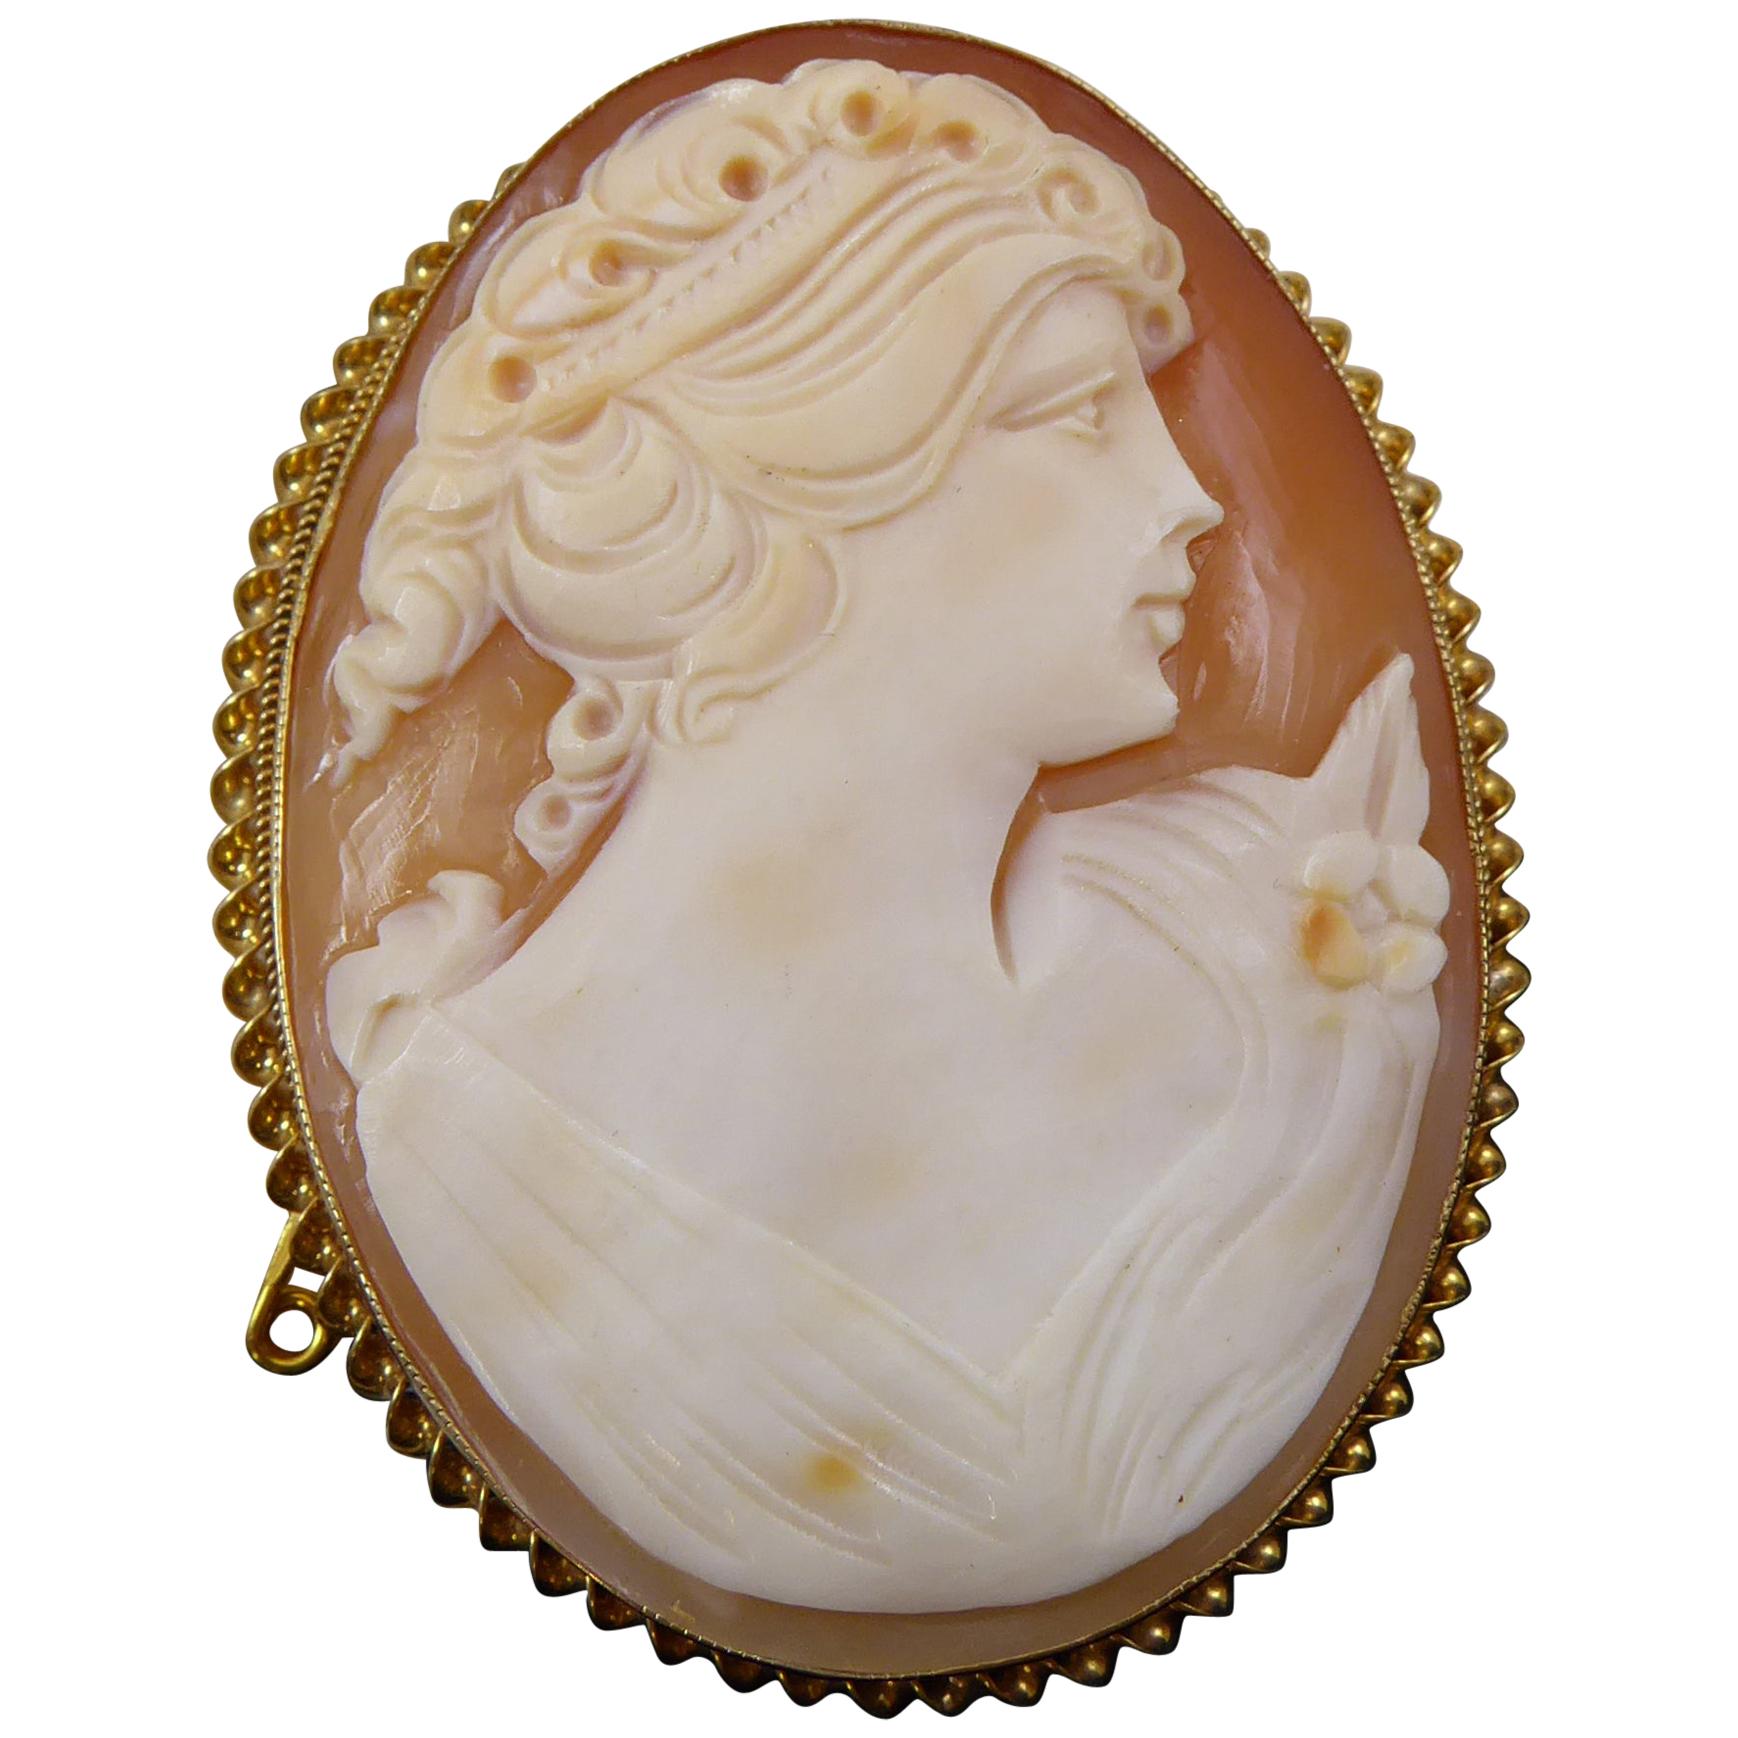 Vintage Cameo Shell Brooch, Rope Twist Edge, 1970s